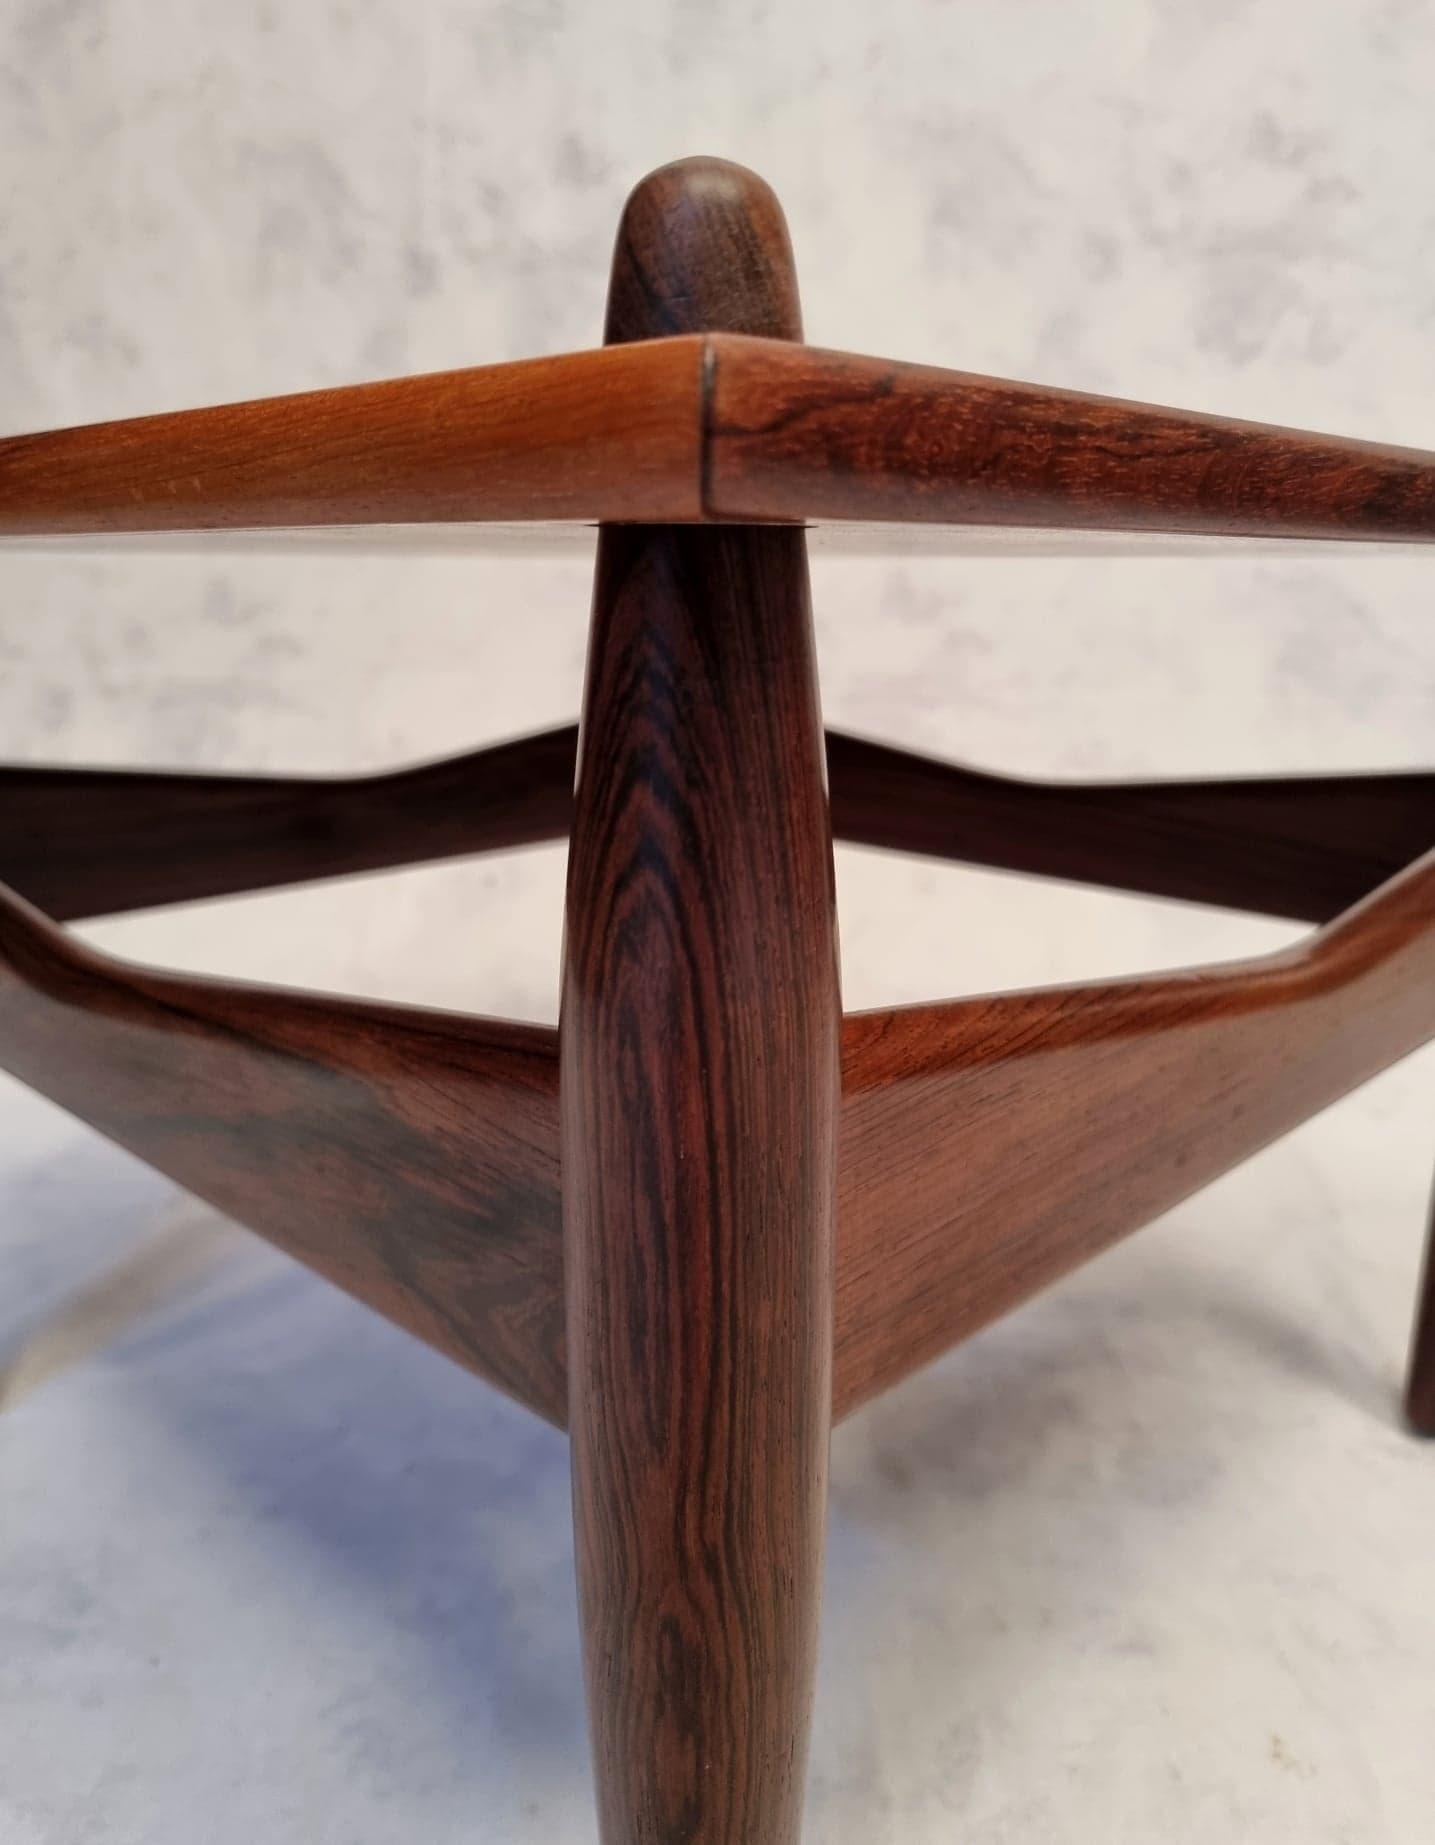 Wood Pair Of Side Tables By Illum Wikkelsø – N°272, Rosewood, Ca 1950 For Sale